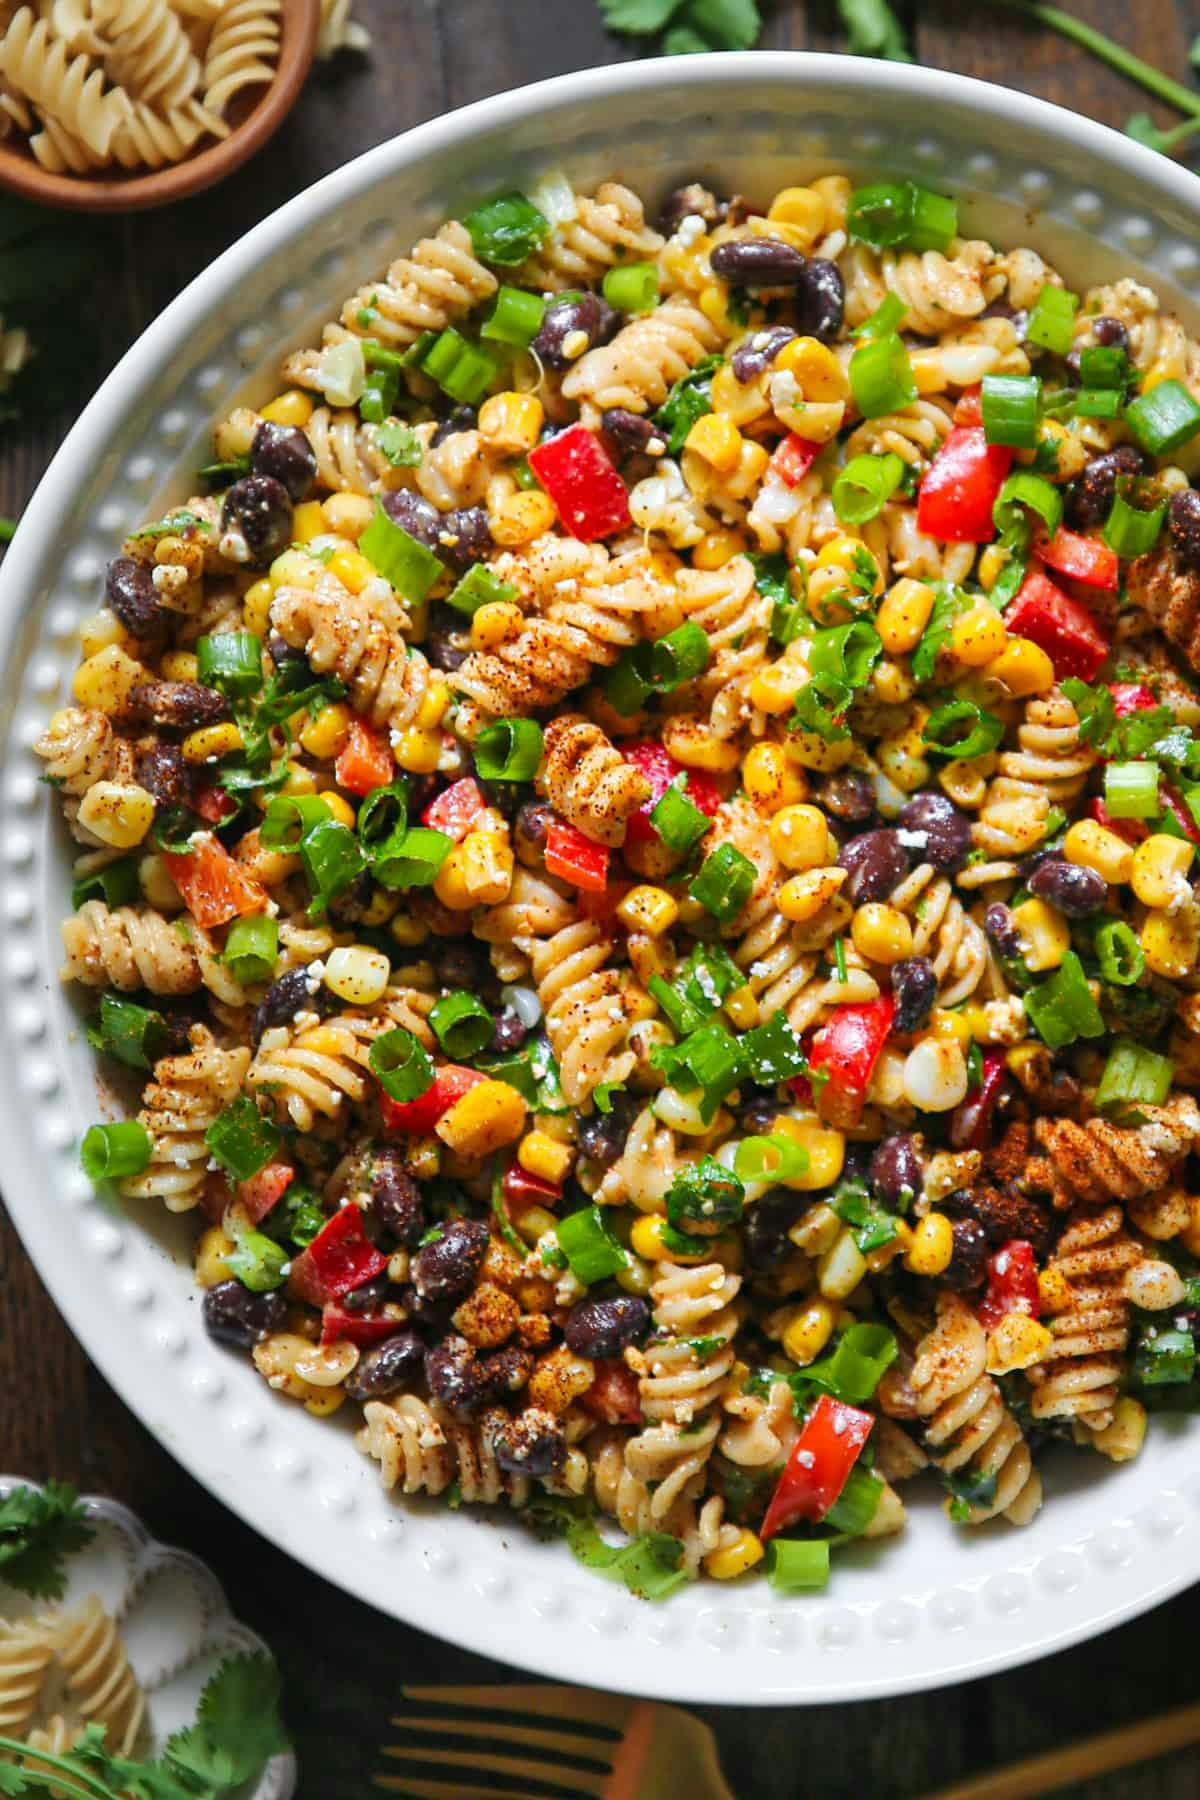 Mexican Street Corn Pasta Salad with Black Beans, Bell Peppers, and Cotija Cheese